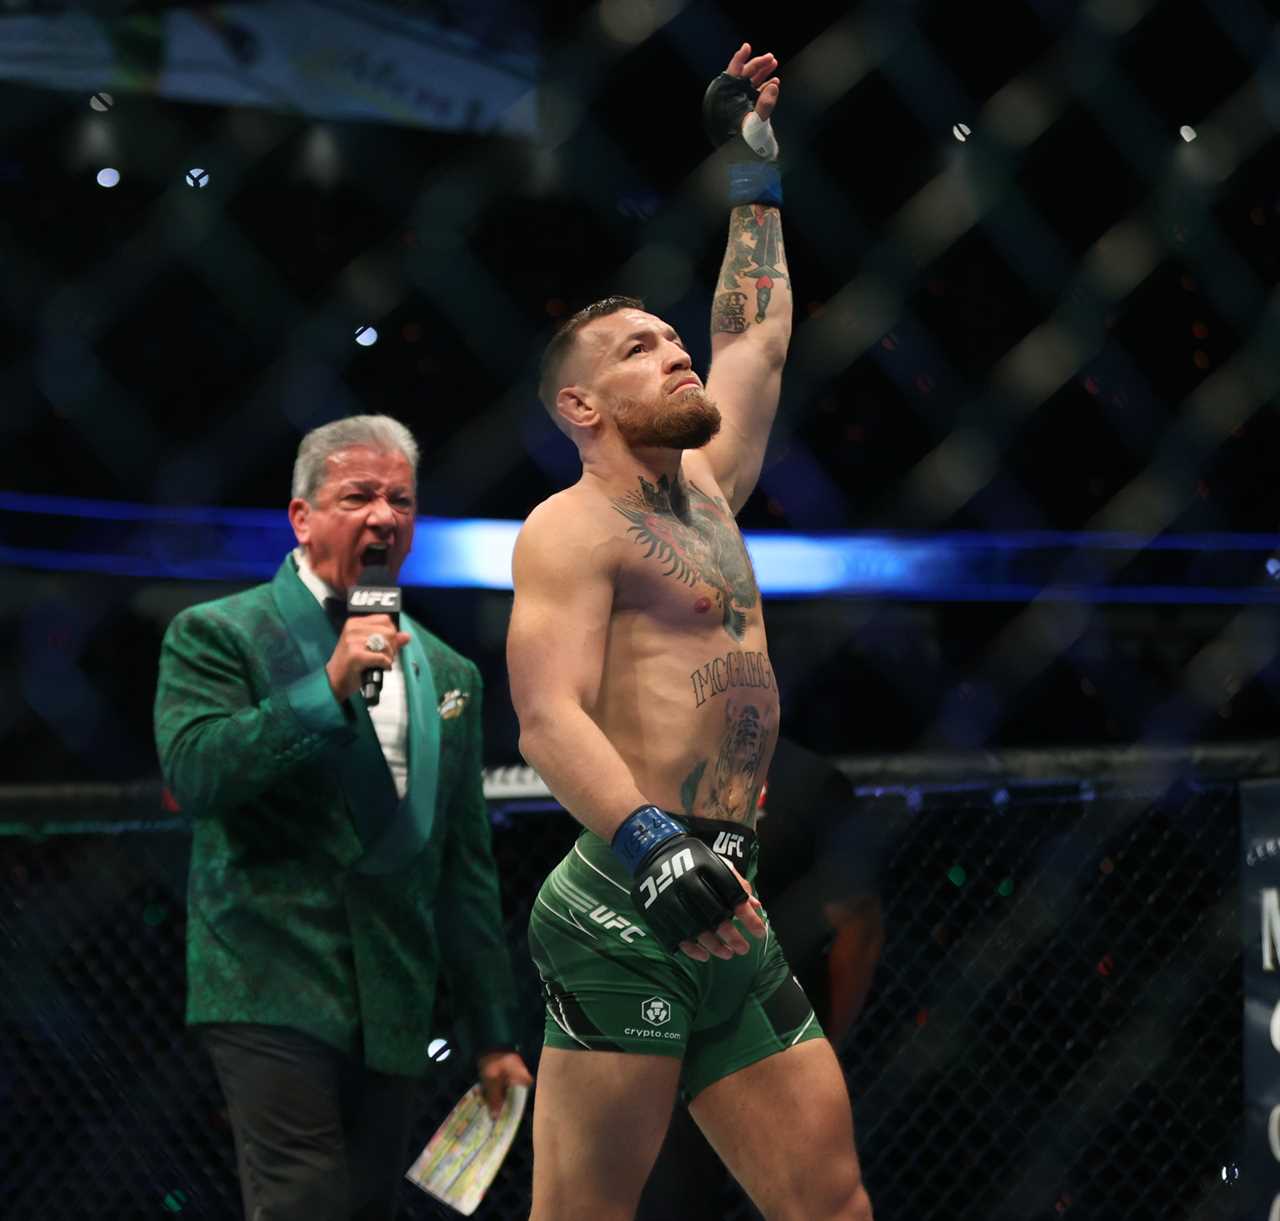 Google reveals Conor McGregor's death hoax after UFC star's Wikipedia has been changed to claim he died on August 4th